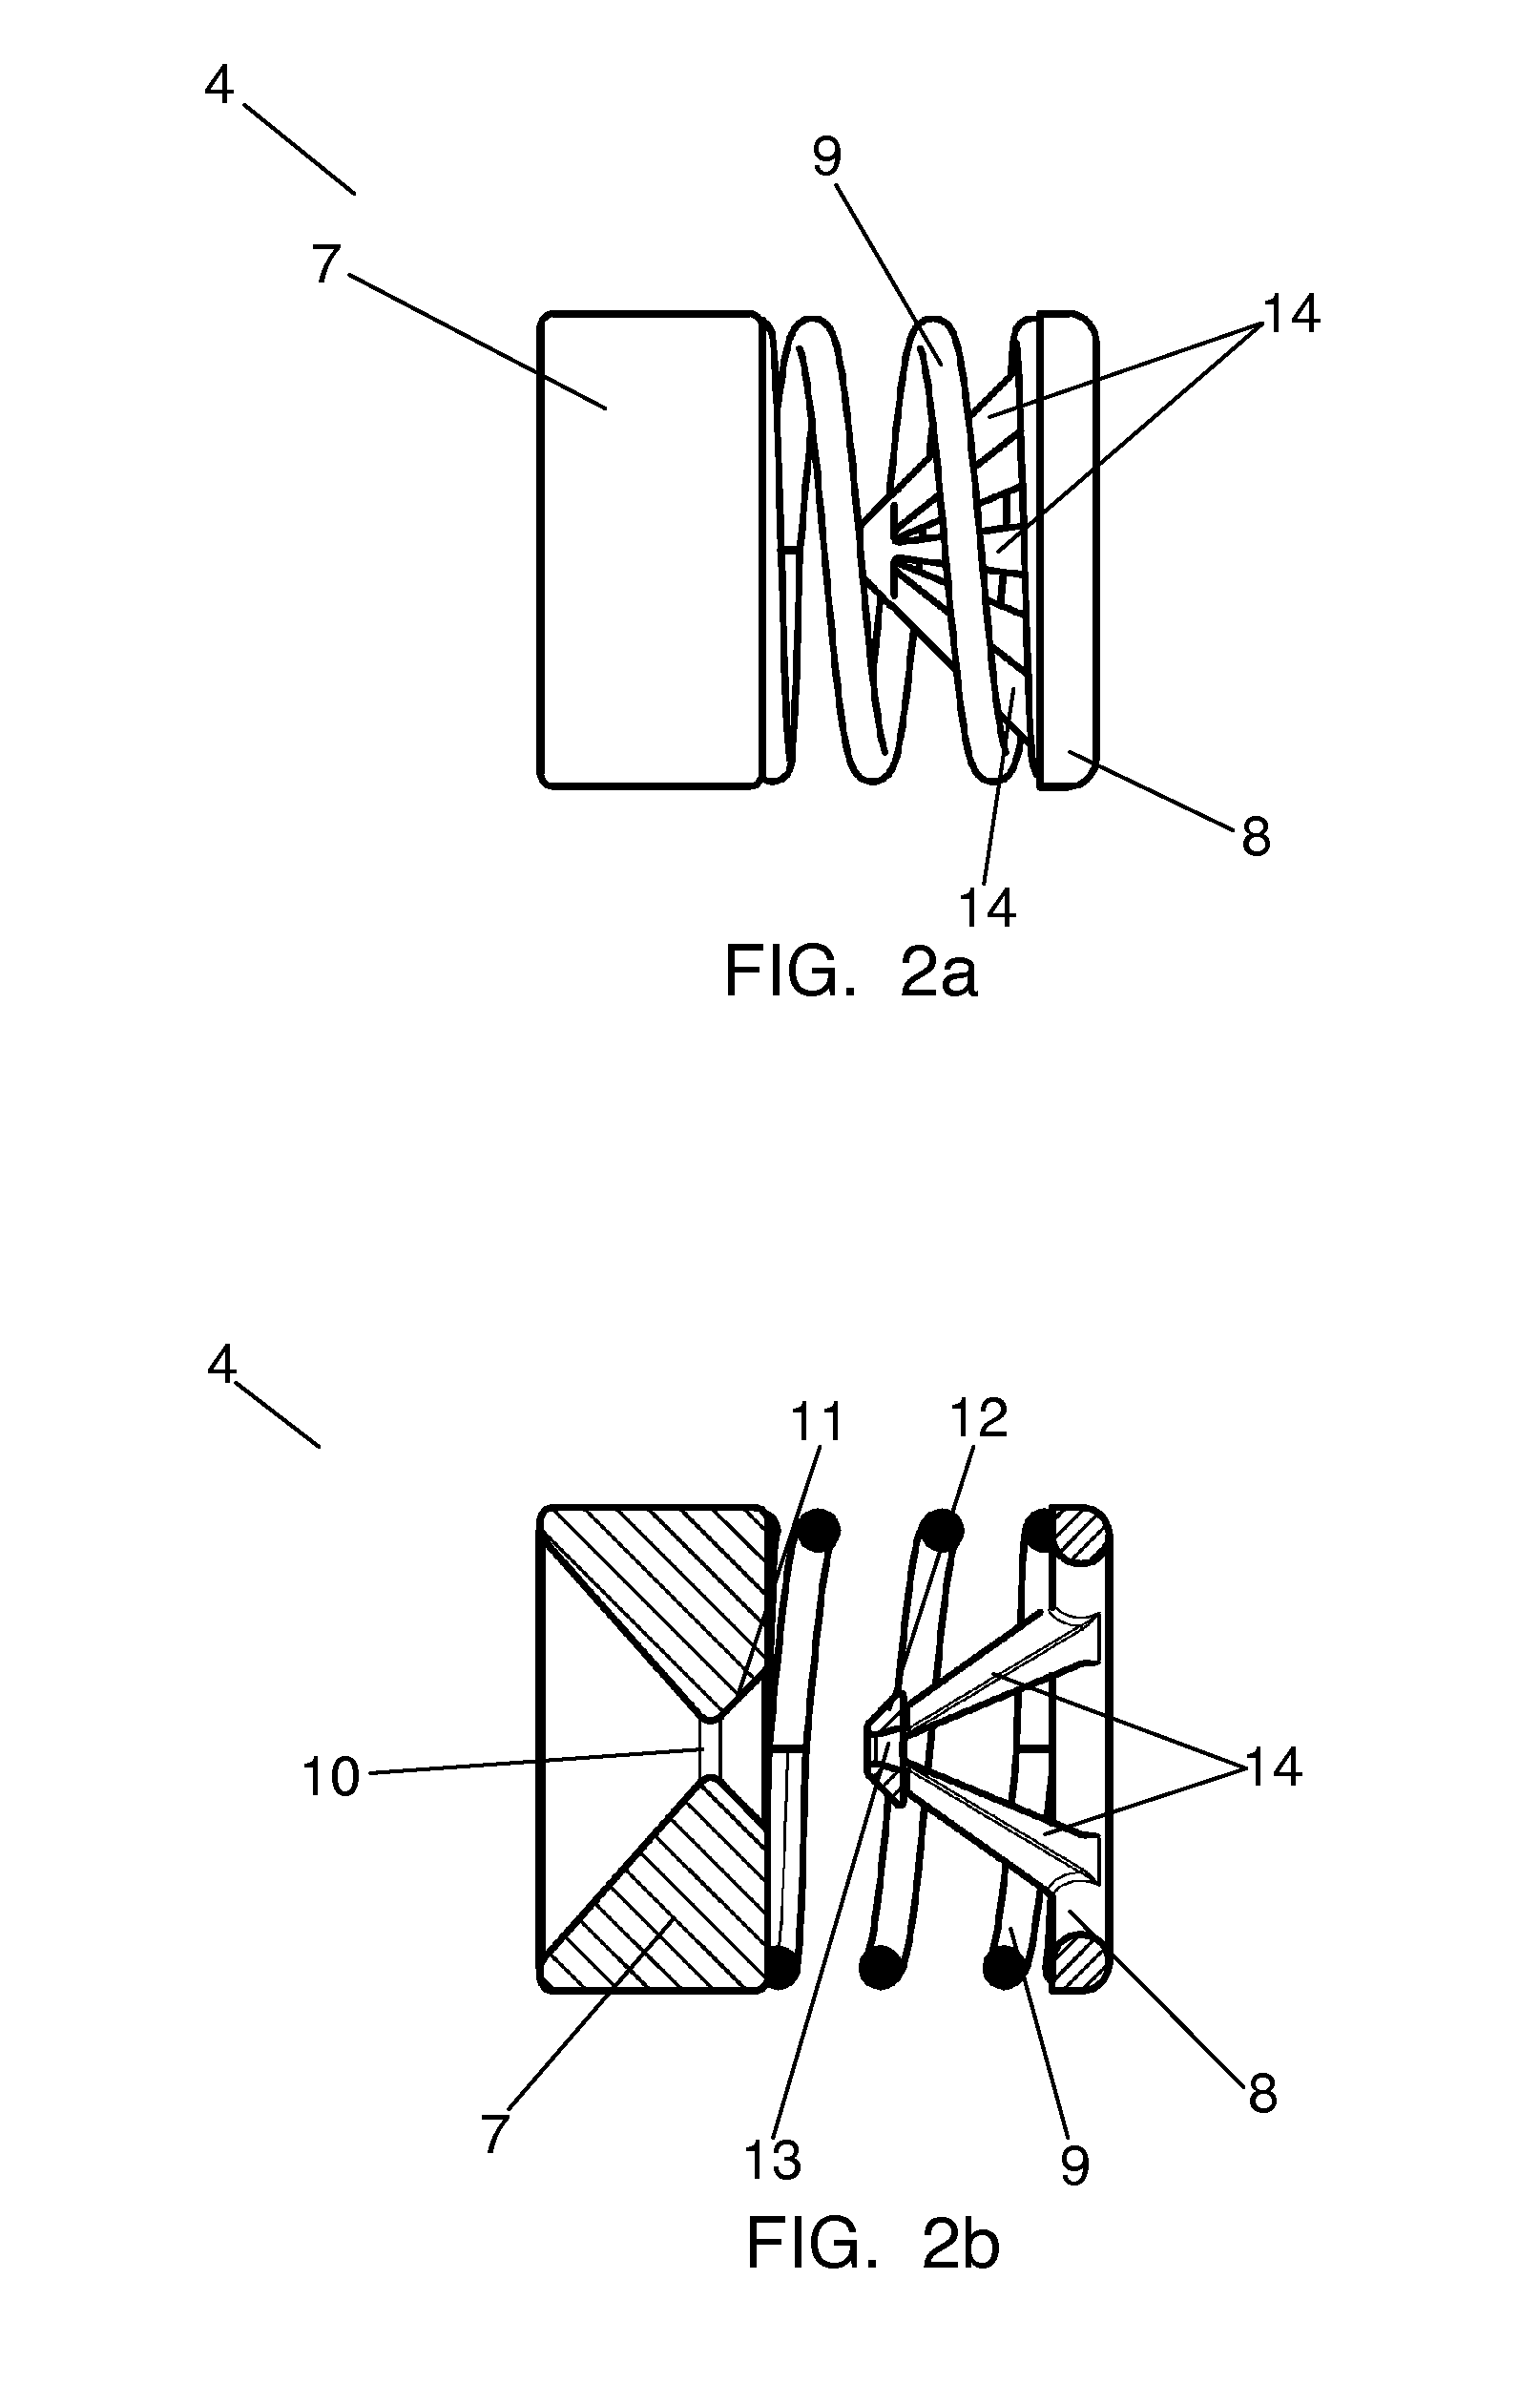 Expansion valve with variable opening degree